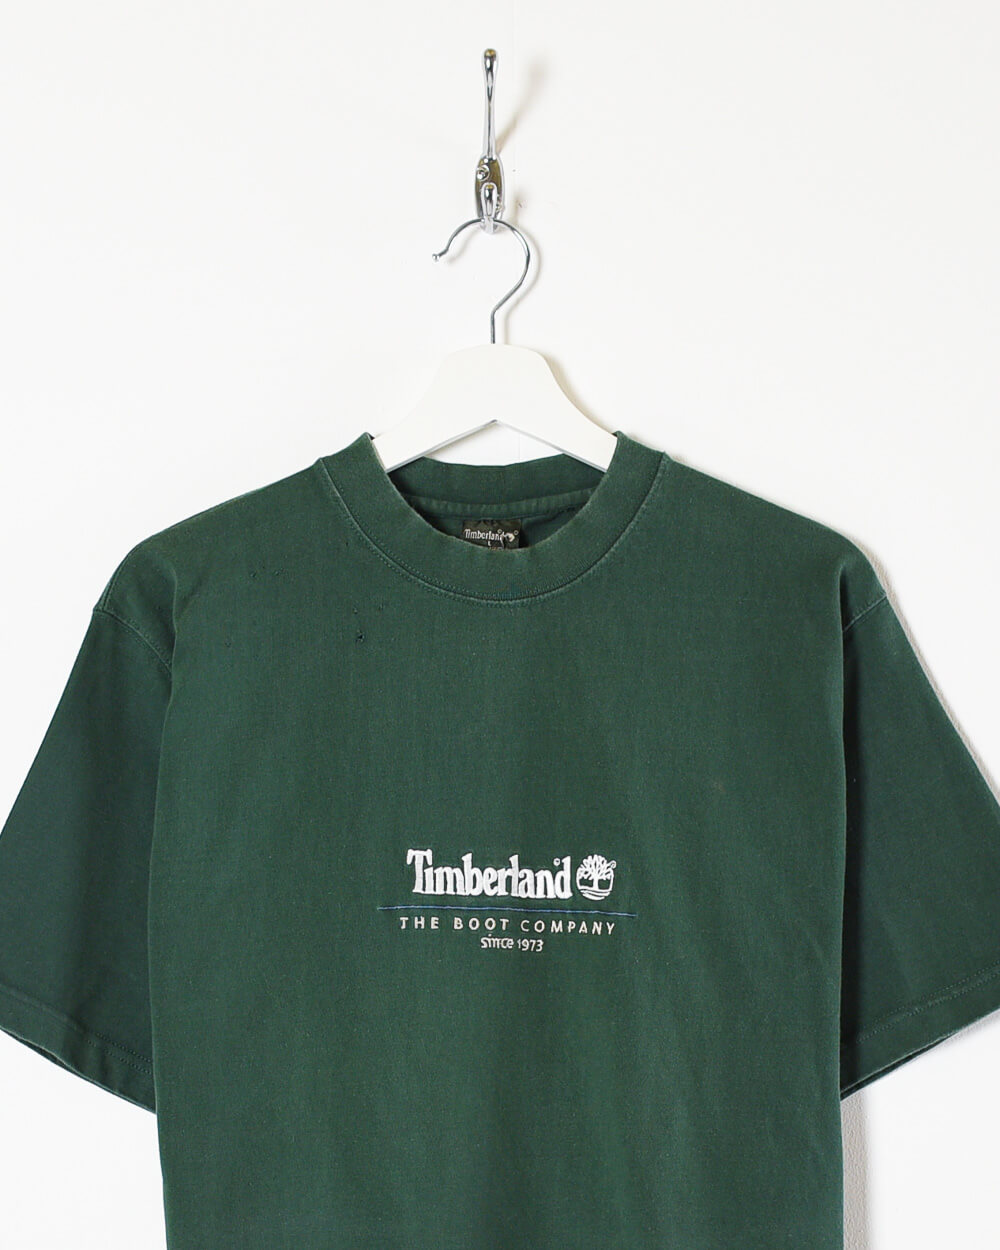 Green Timberland The Boot Company Since 1973 T-Shirt - Large